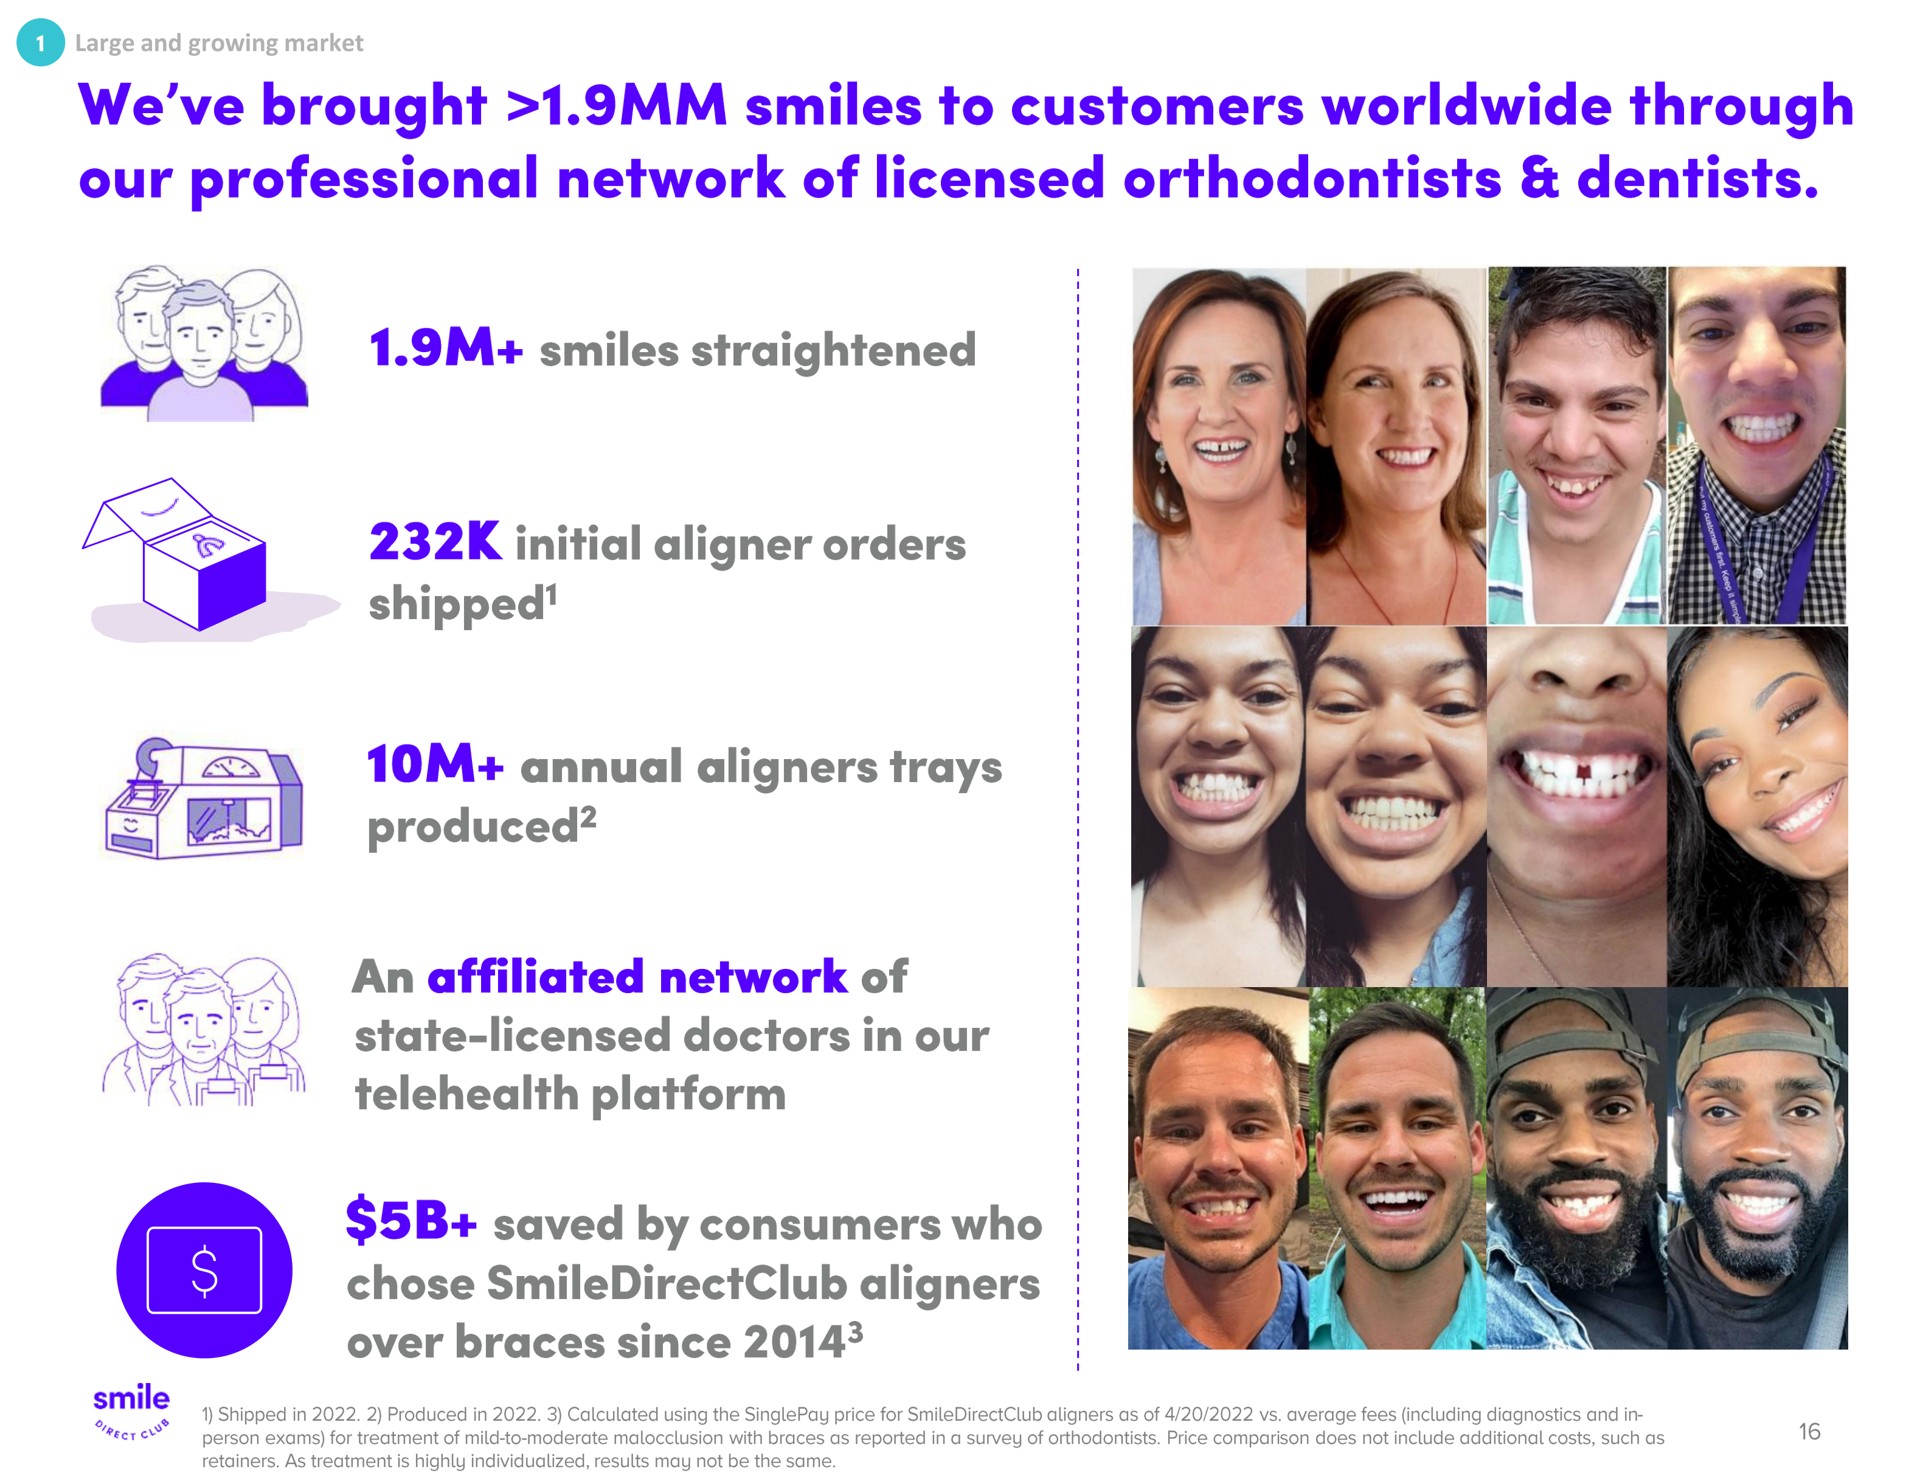 we brought smiles to customers through our professional network of licensed orthodontists dentists smiles straightened initial aligner orders annual trays an affiliated network of platform saved by consumers who | SmileDirectClub